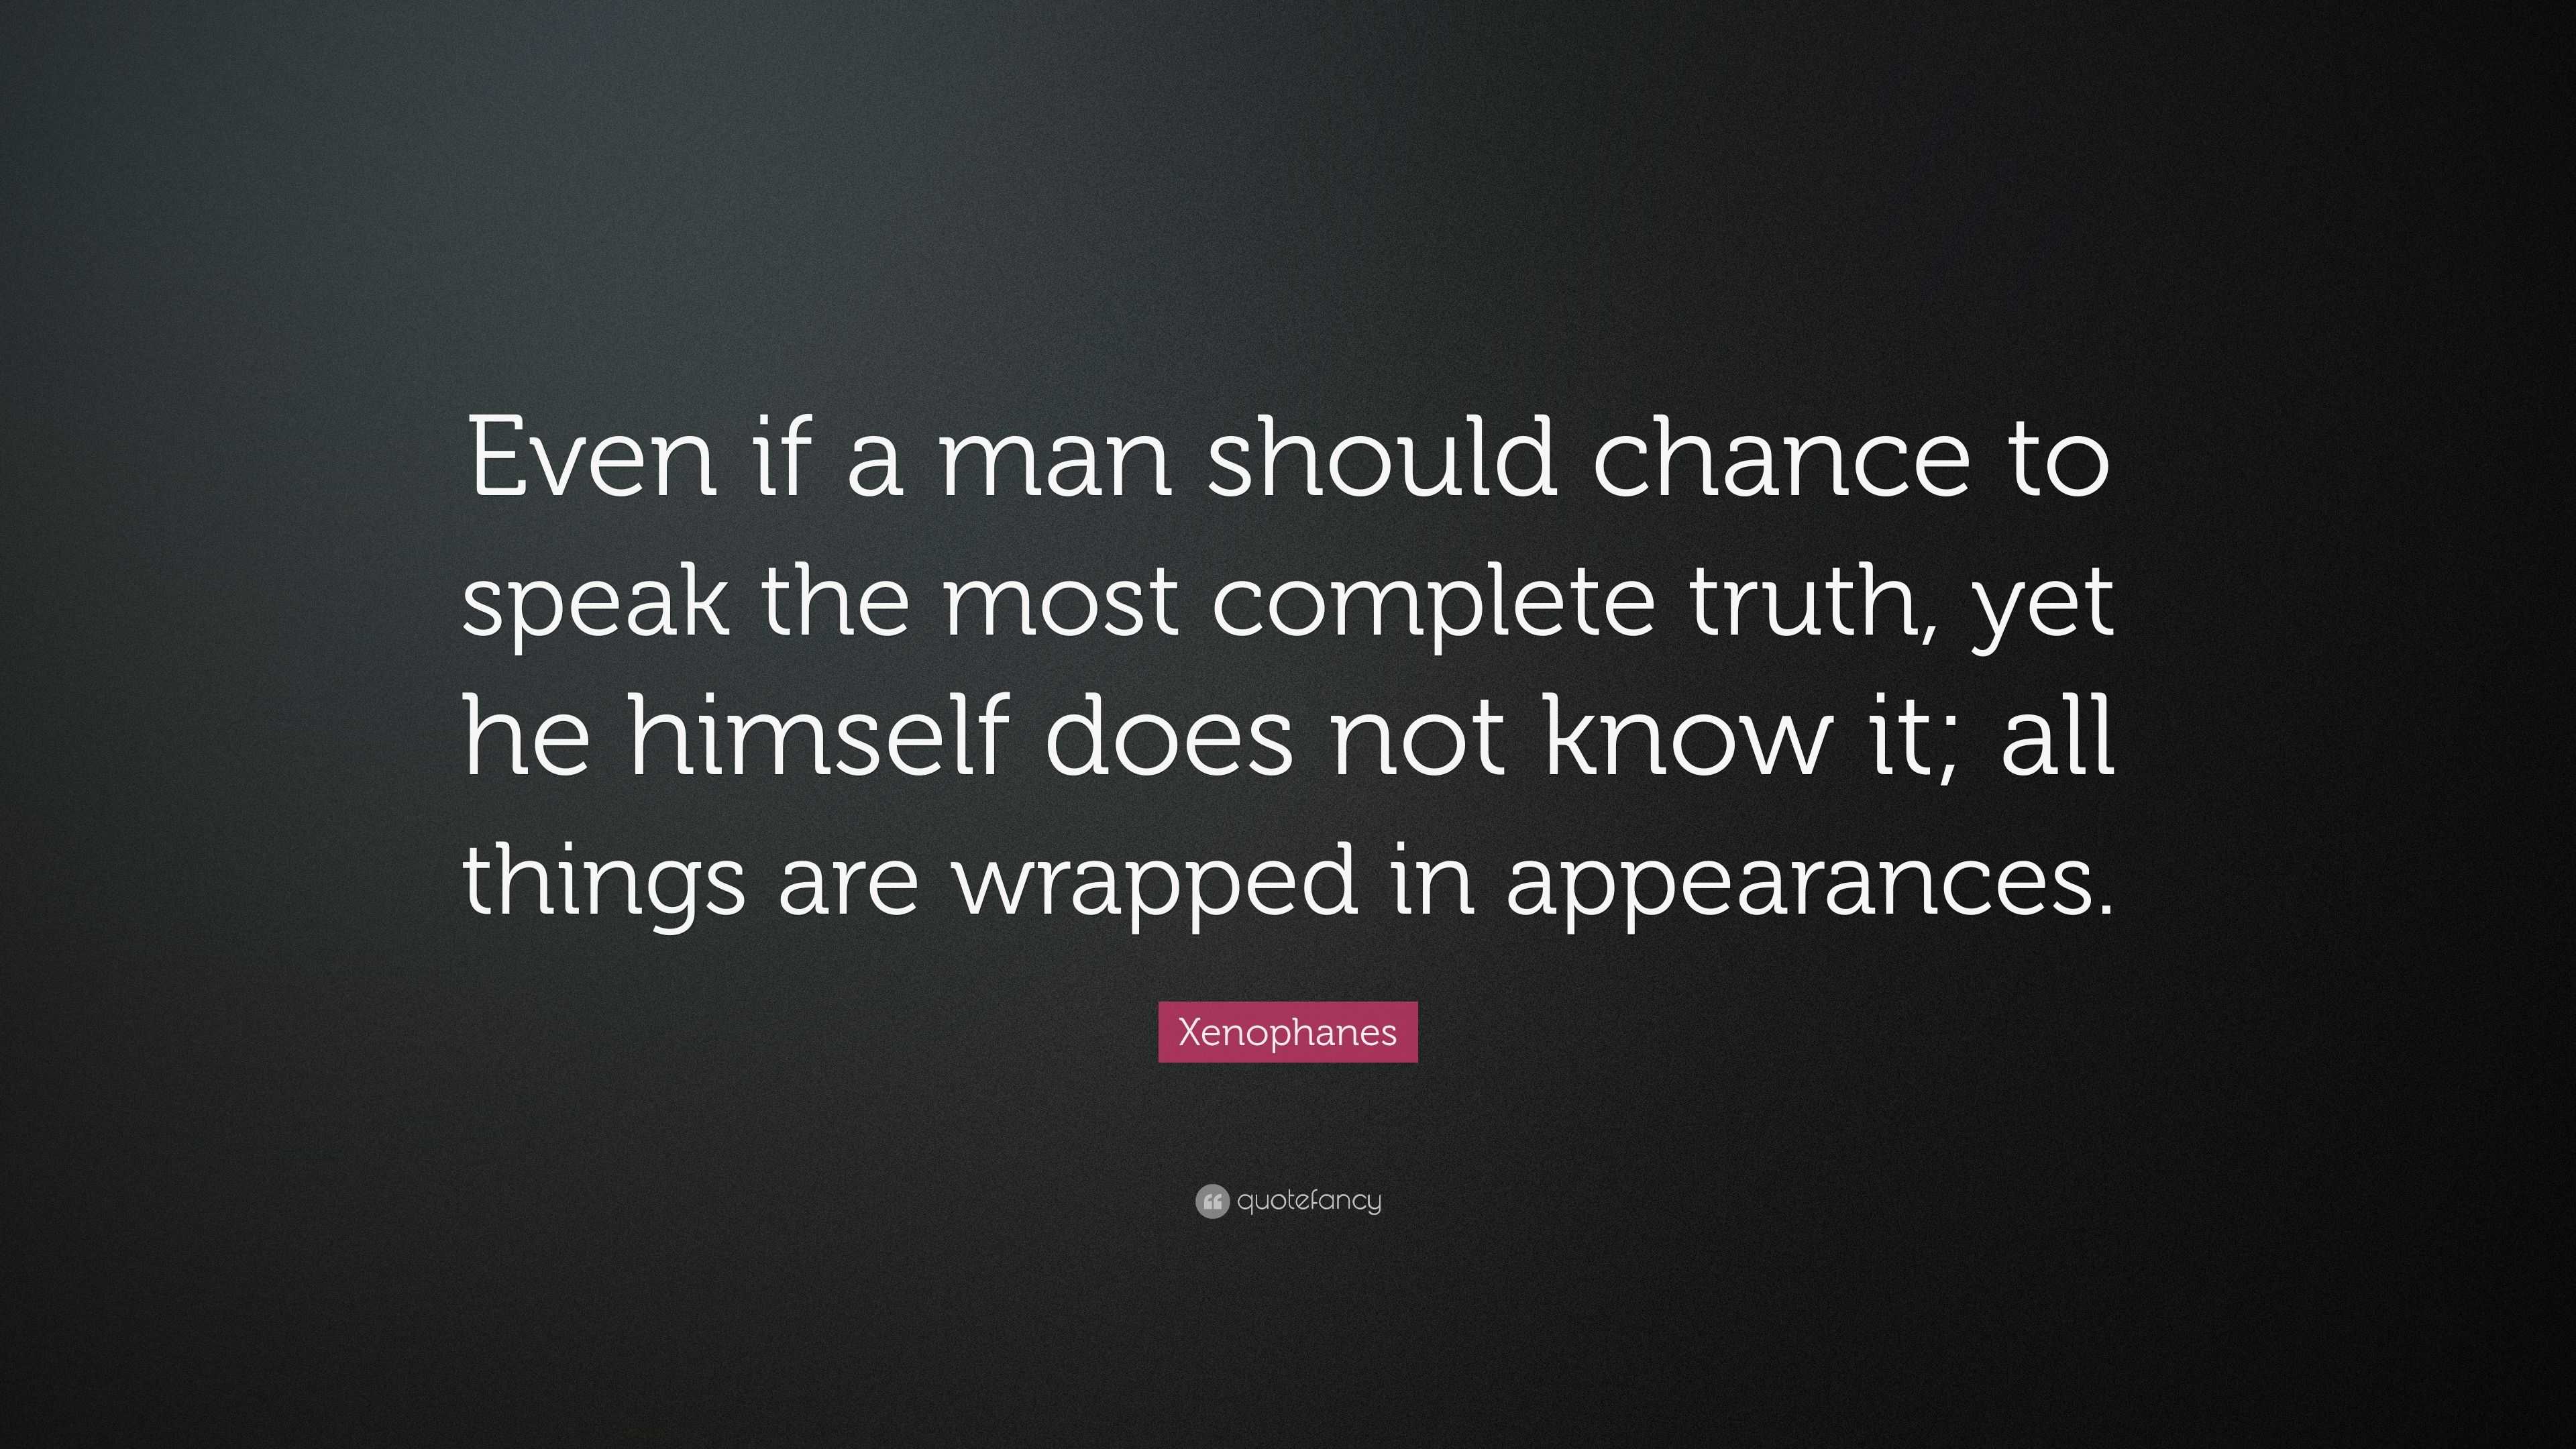 Xenophanes Quote: “Even if a man should chance to speak the most